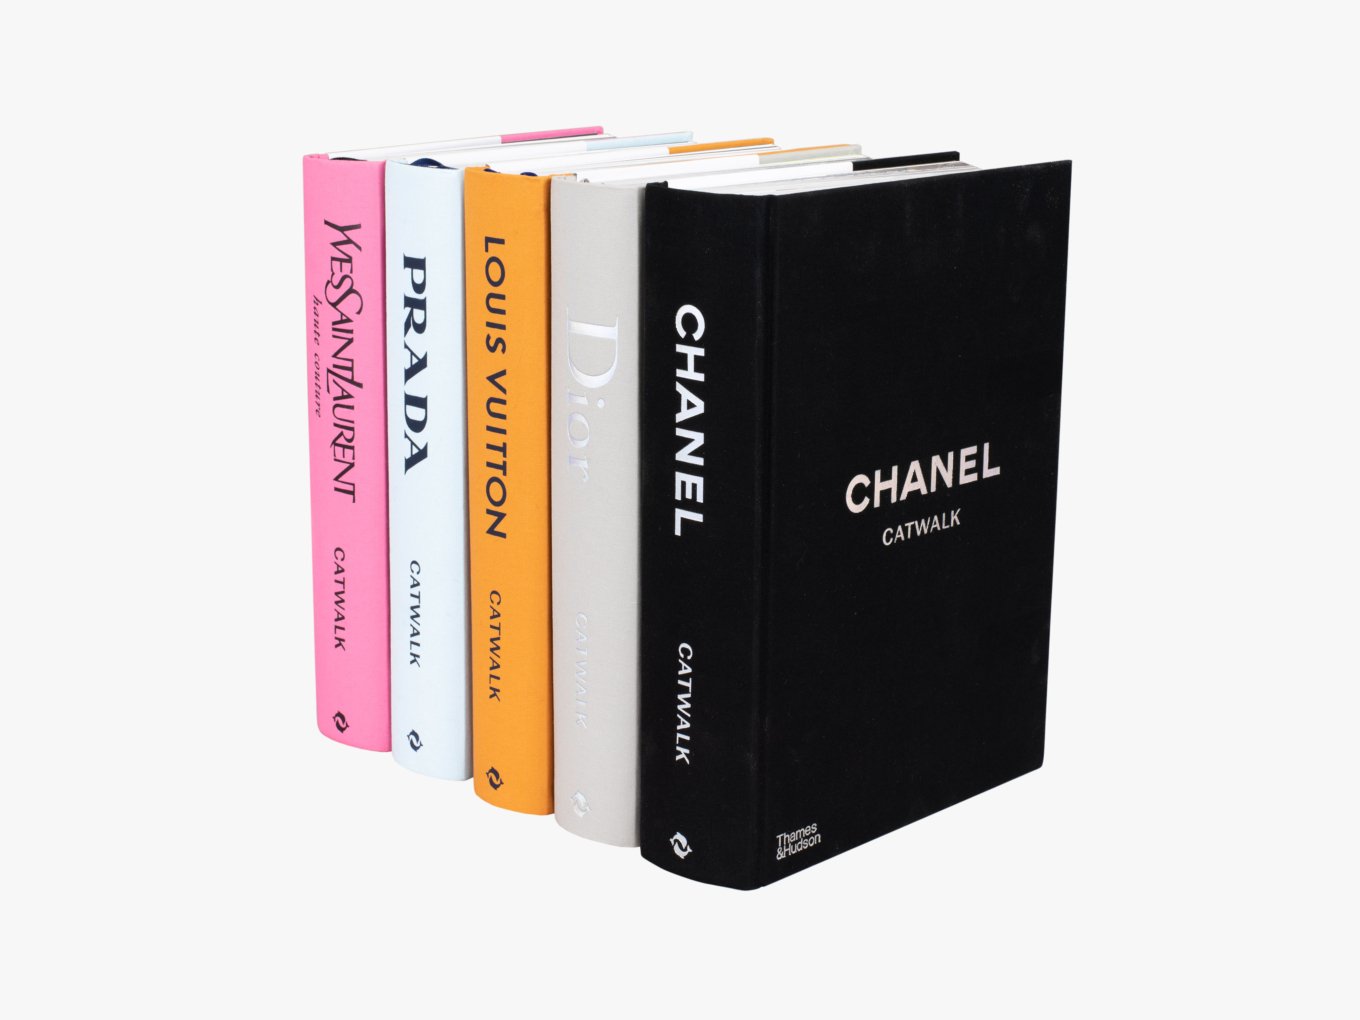 CHANEL CATWALK COLLECTION BOOK